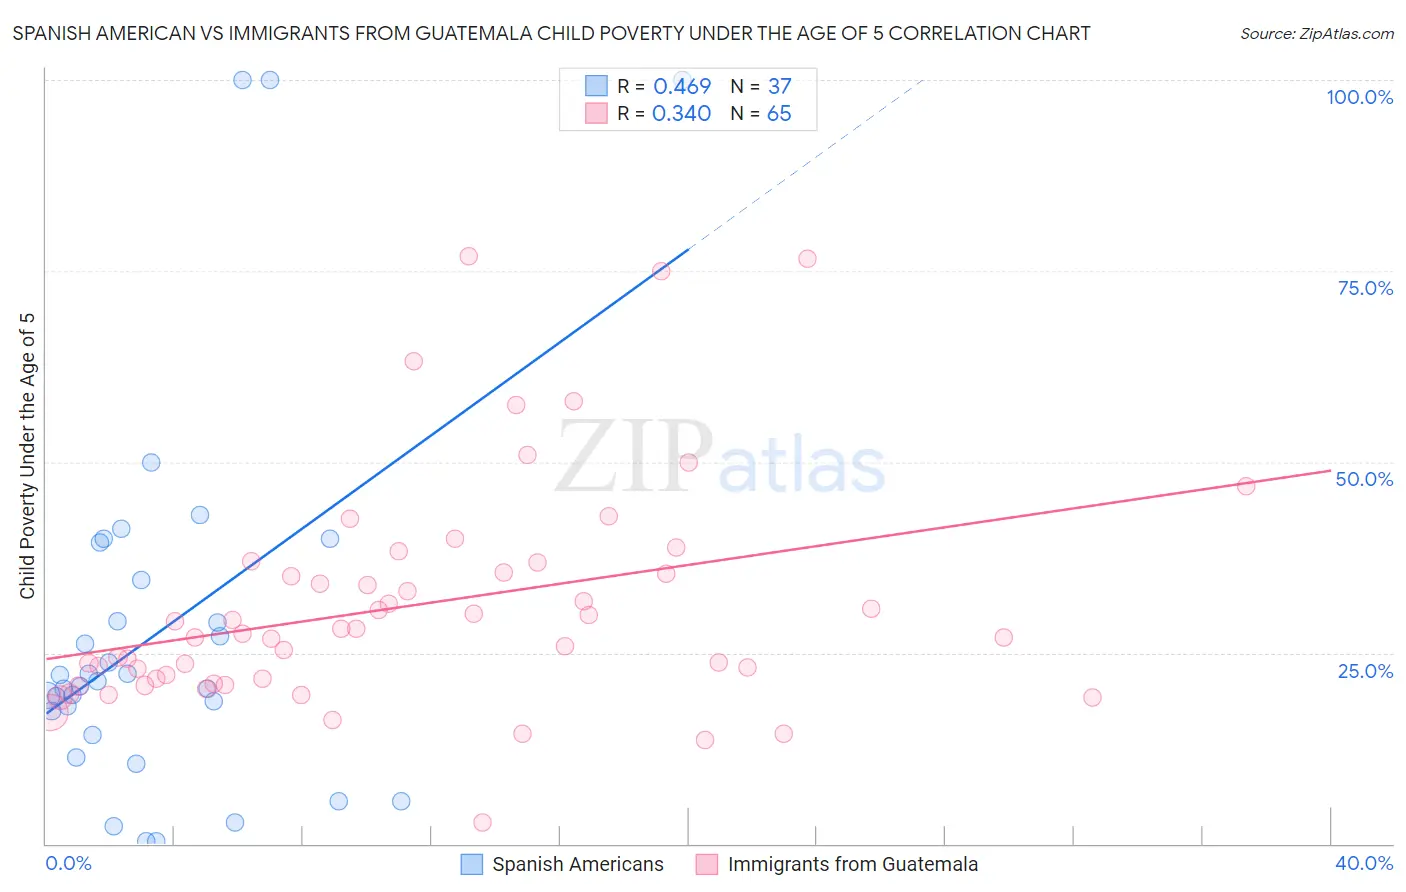 Spanish American vs Immigrants from Guatemala Child Poverty Under the Age of 5